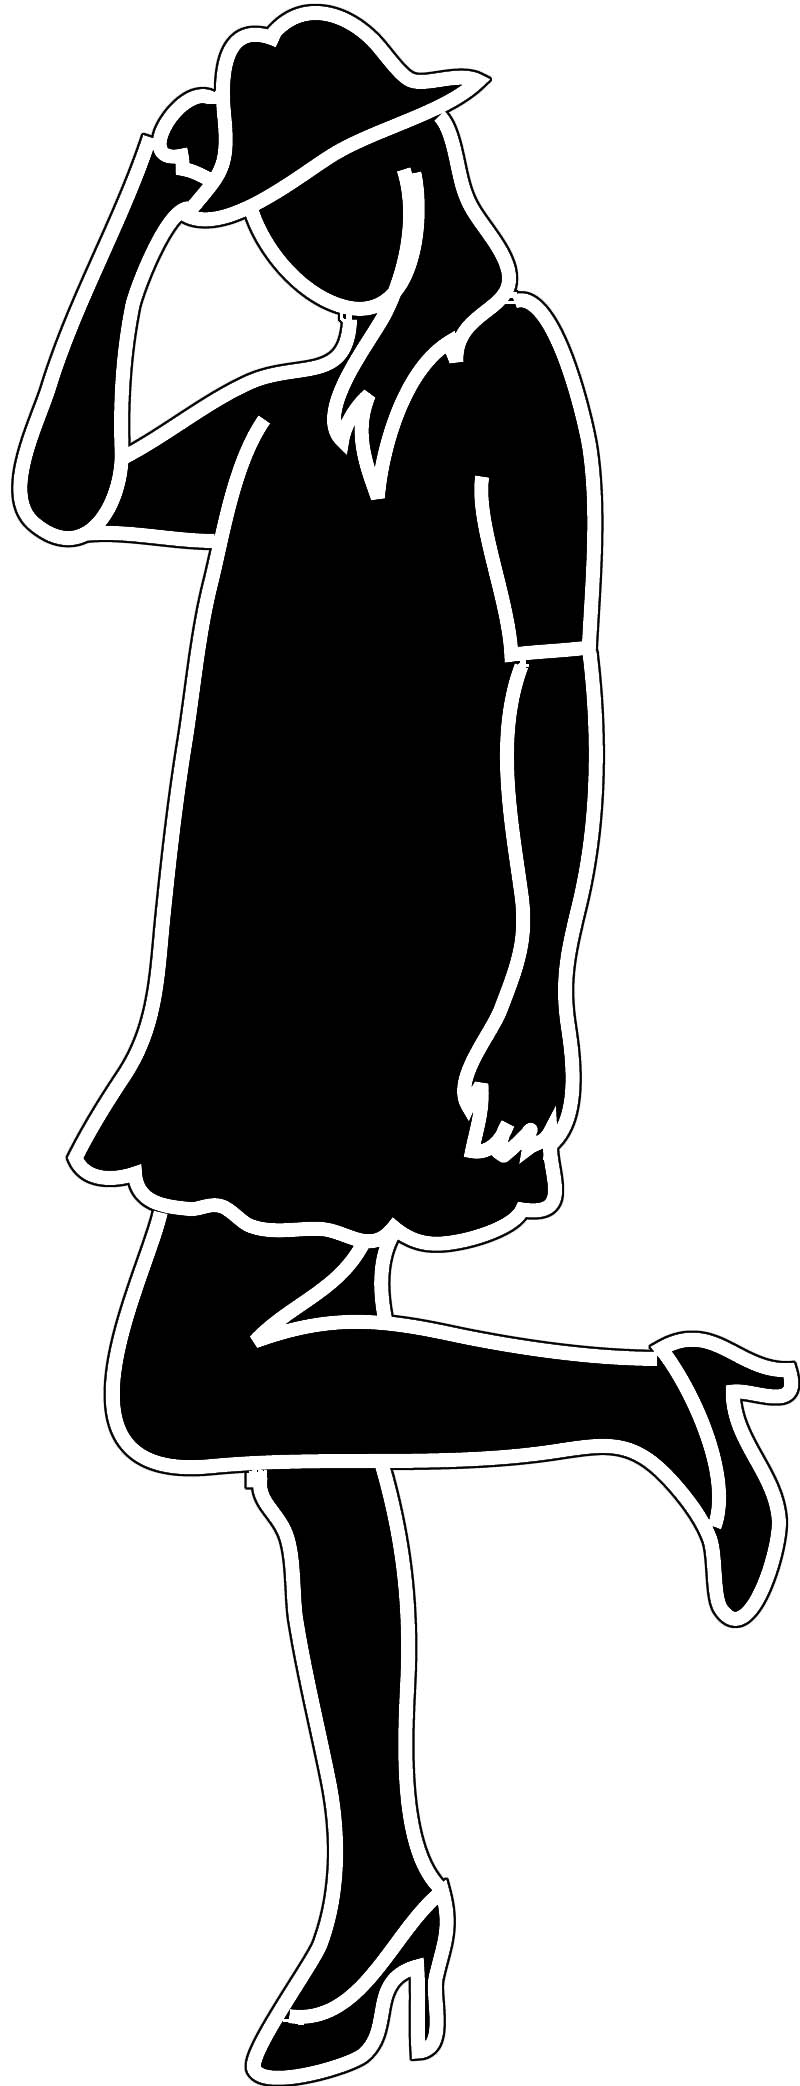 Woman Silhouette Images - Cliparts.co